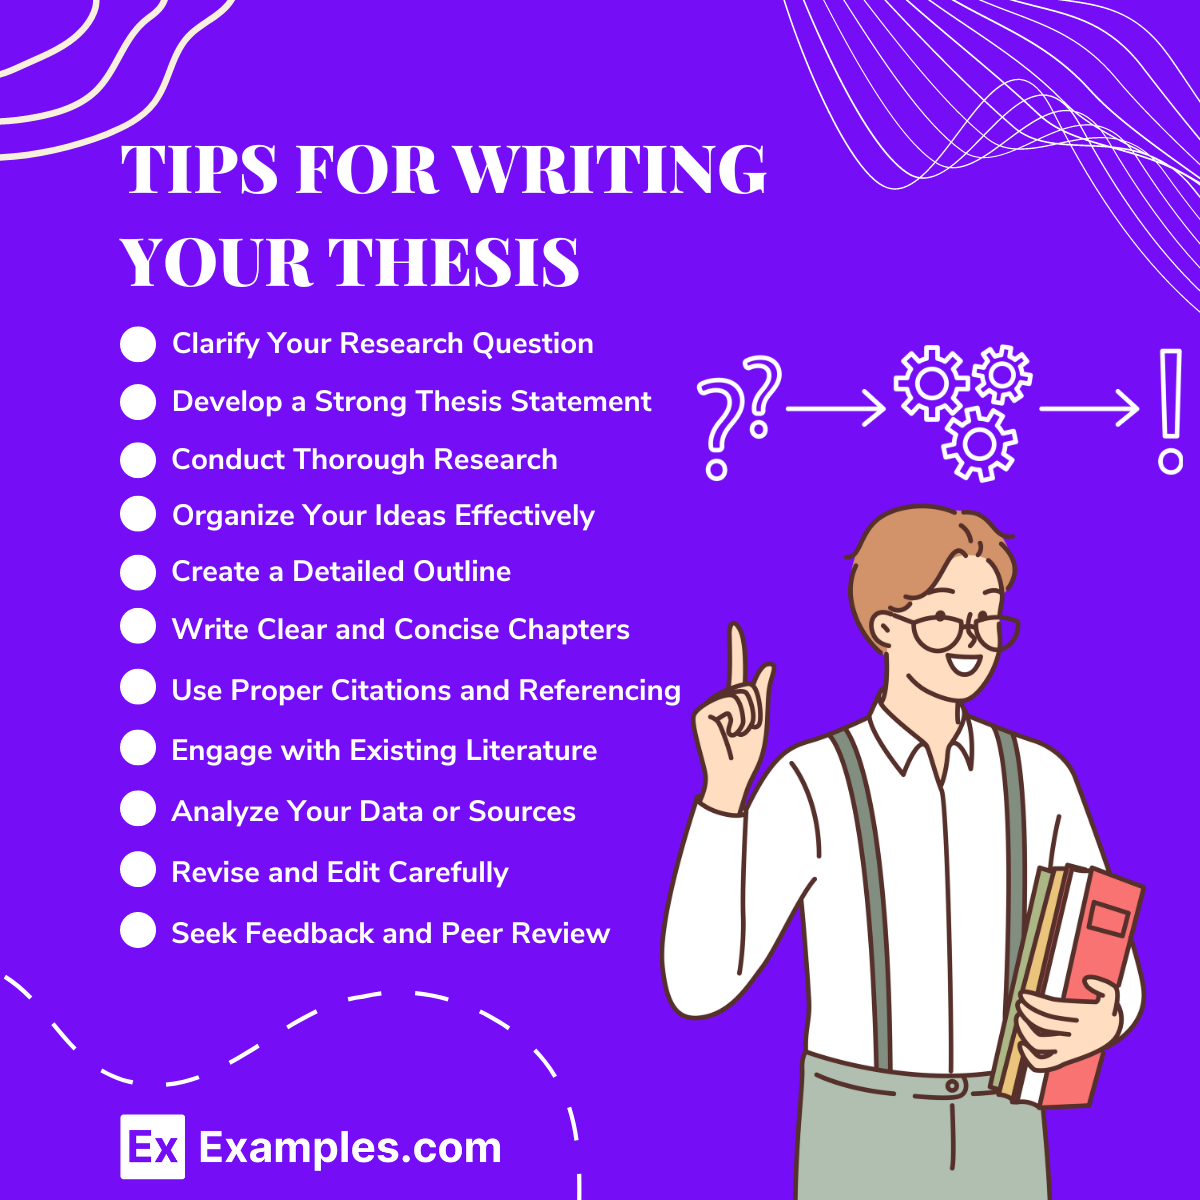 Tips for Writing Your Thesis